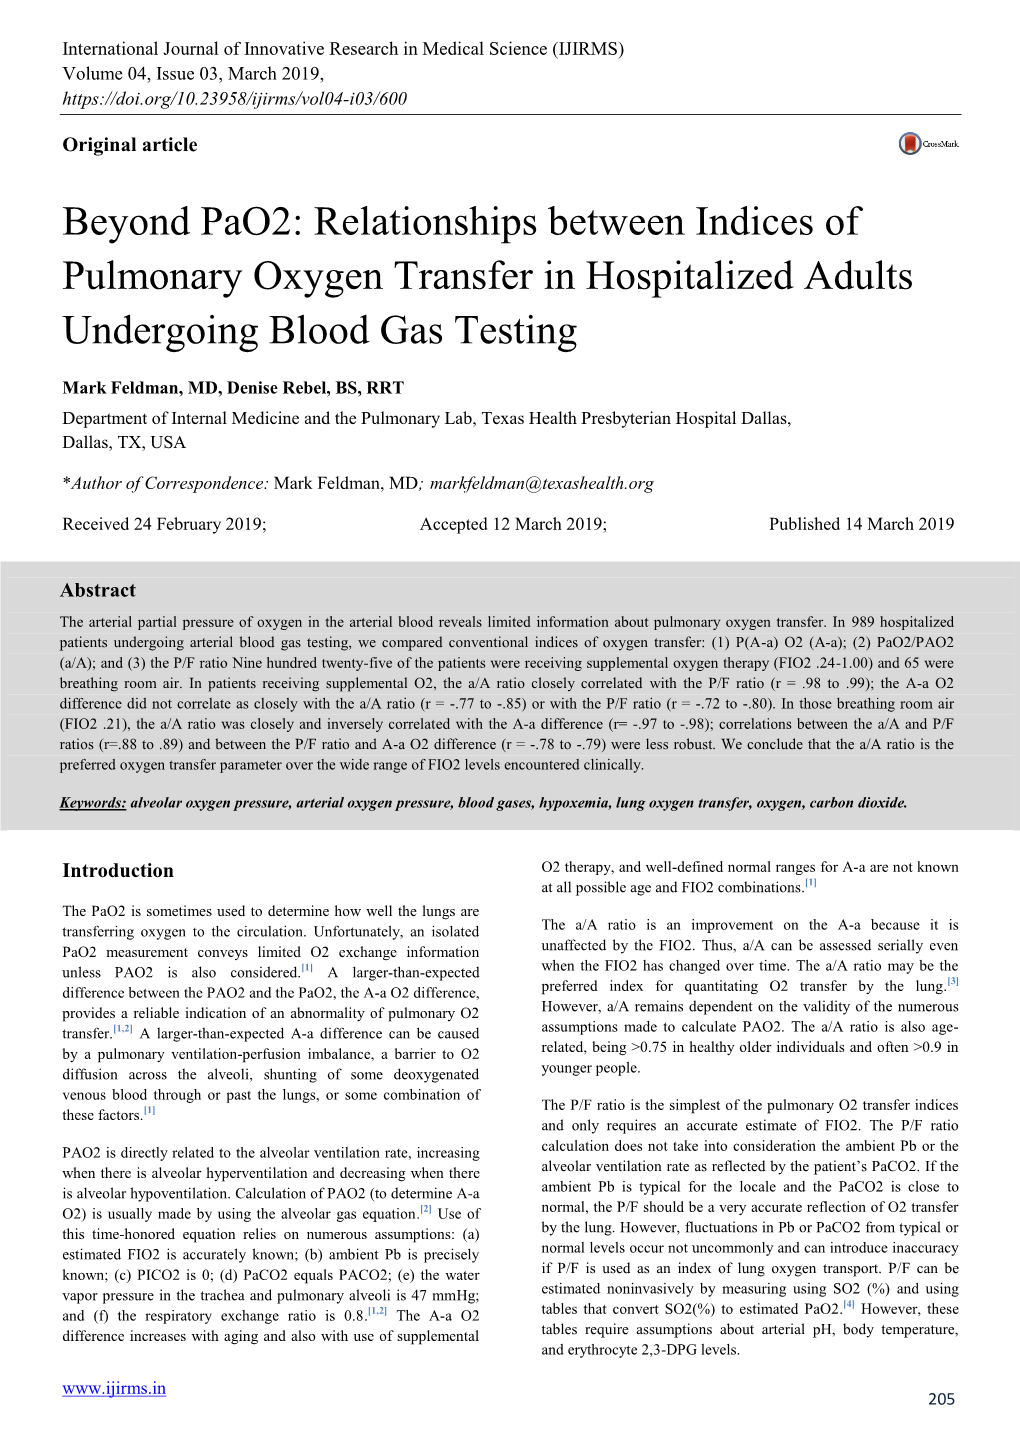 Beyond Pao2: Relationships Between Indices of Pulmonary Oxygen Transfer in Hospitalized Adults Undergoing Blood Gas Testing